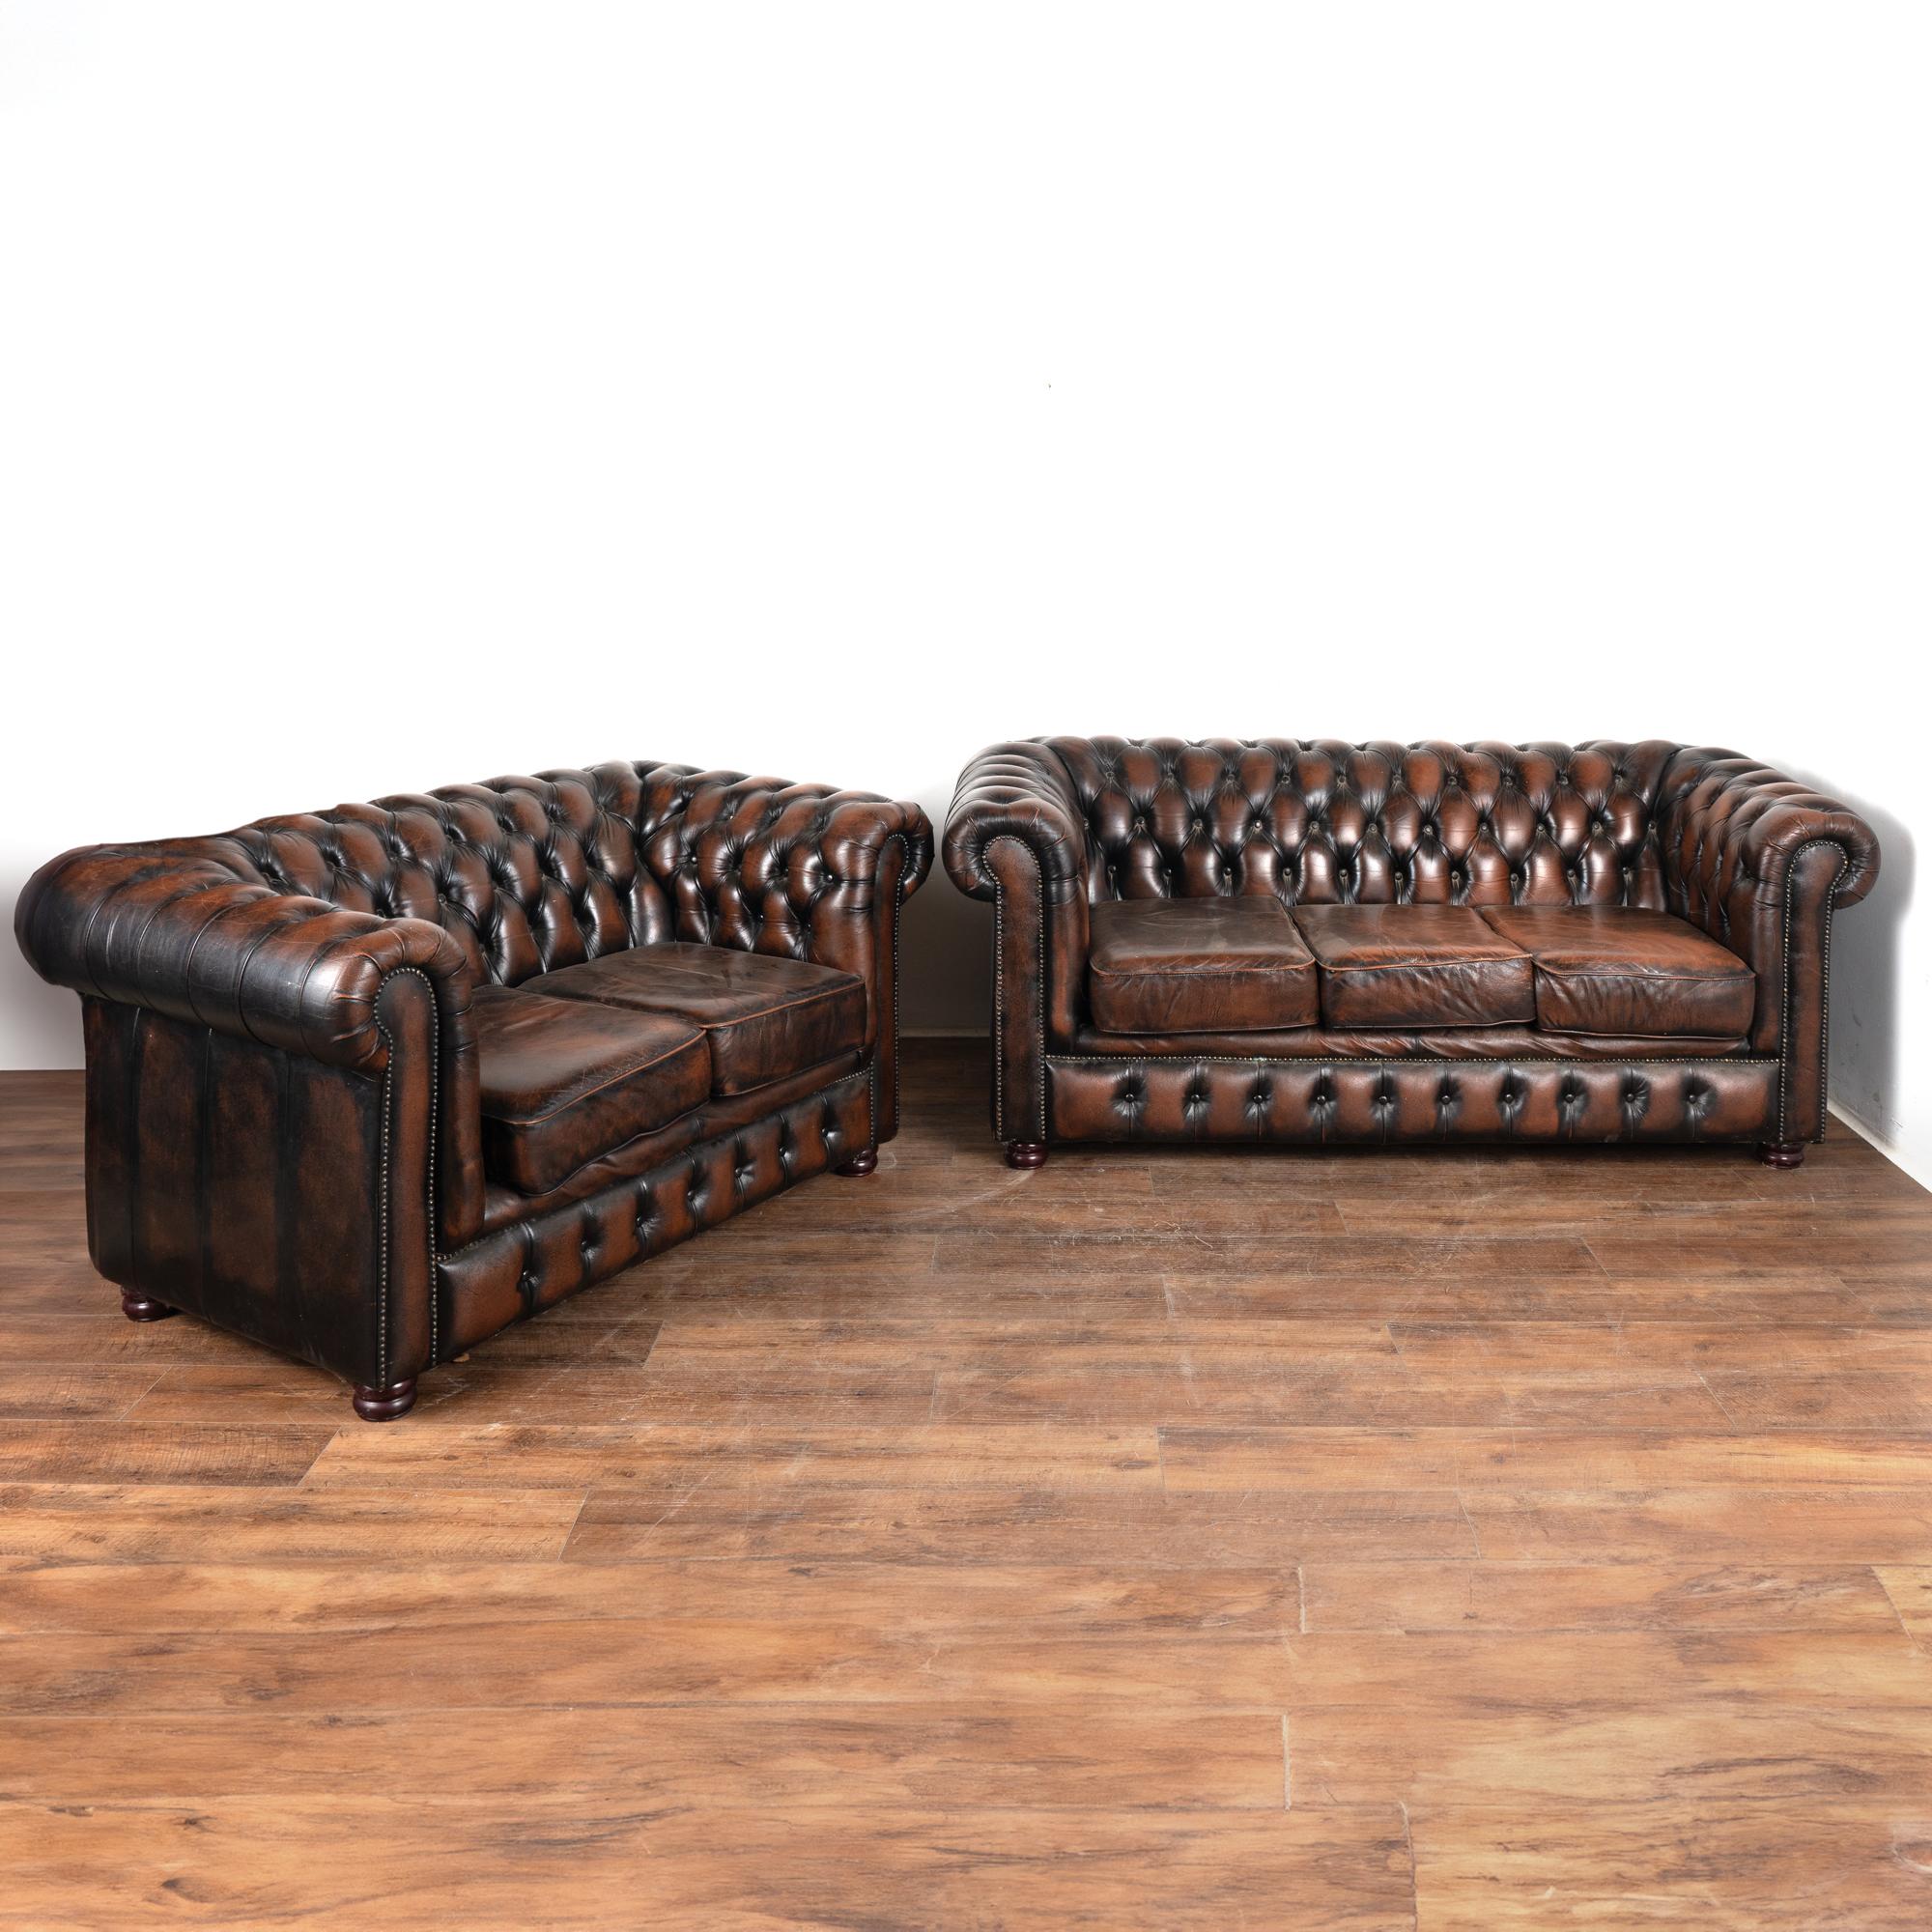 Loaded with character, this two seat sofa and three seat sofa packs a vintage punch with the tufted back of the classic Chesterfield look with self covered buttons, heavy rolled arms nailhead trim and bun feet.
The vintage brown leather is mottled